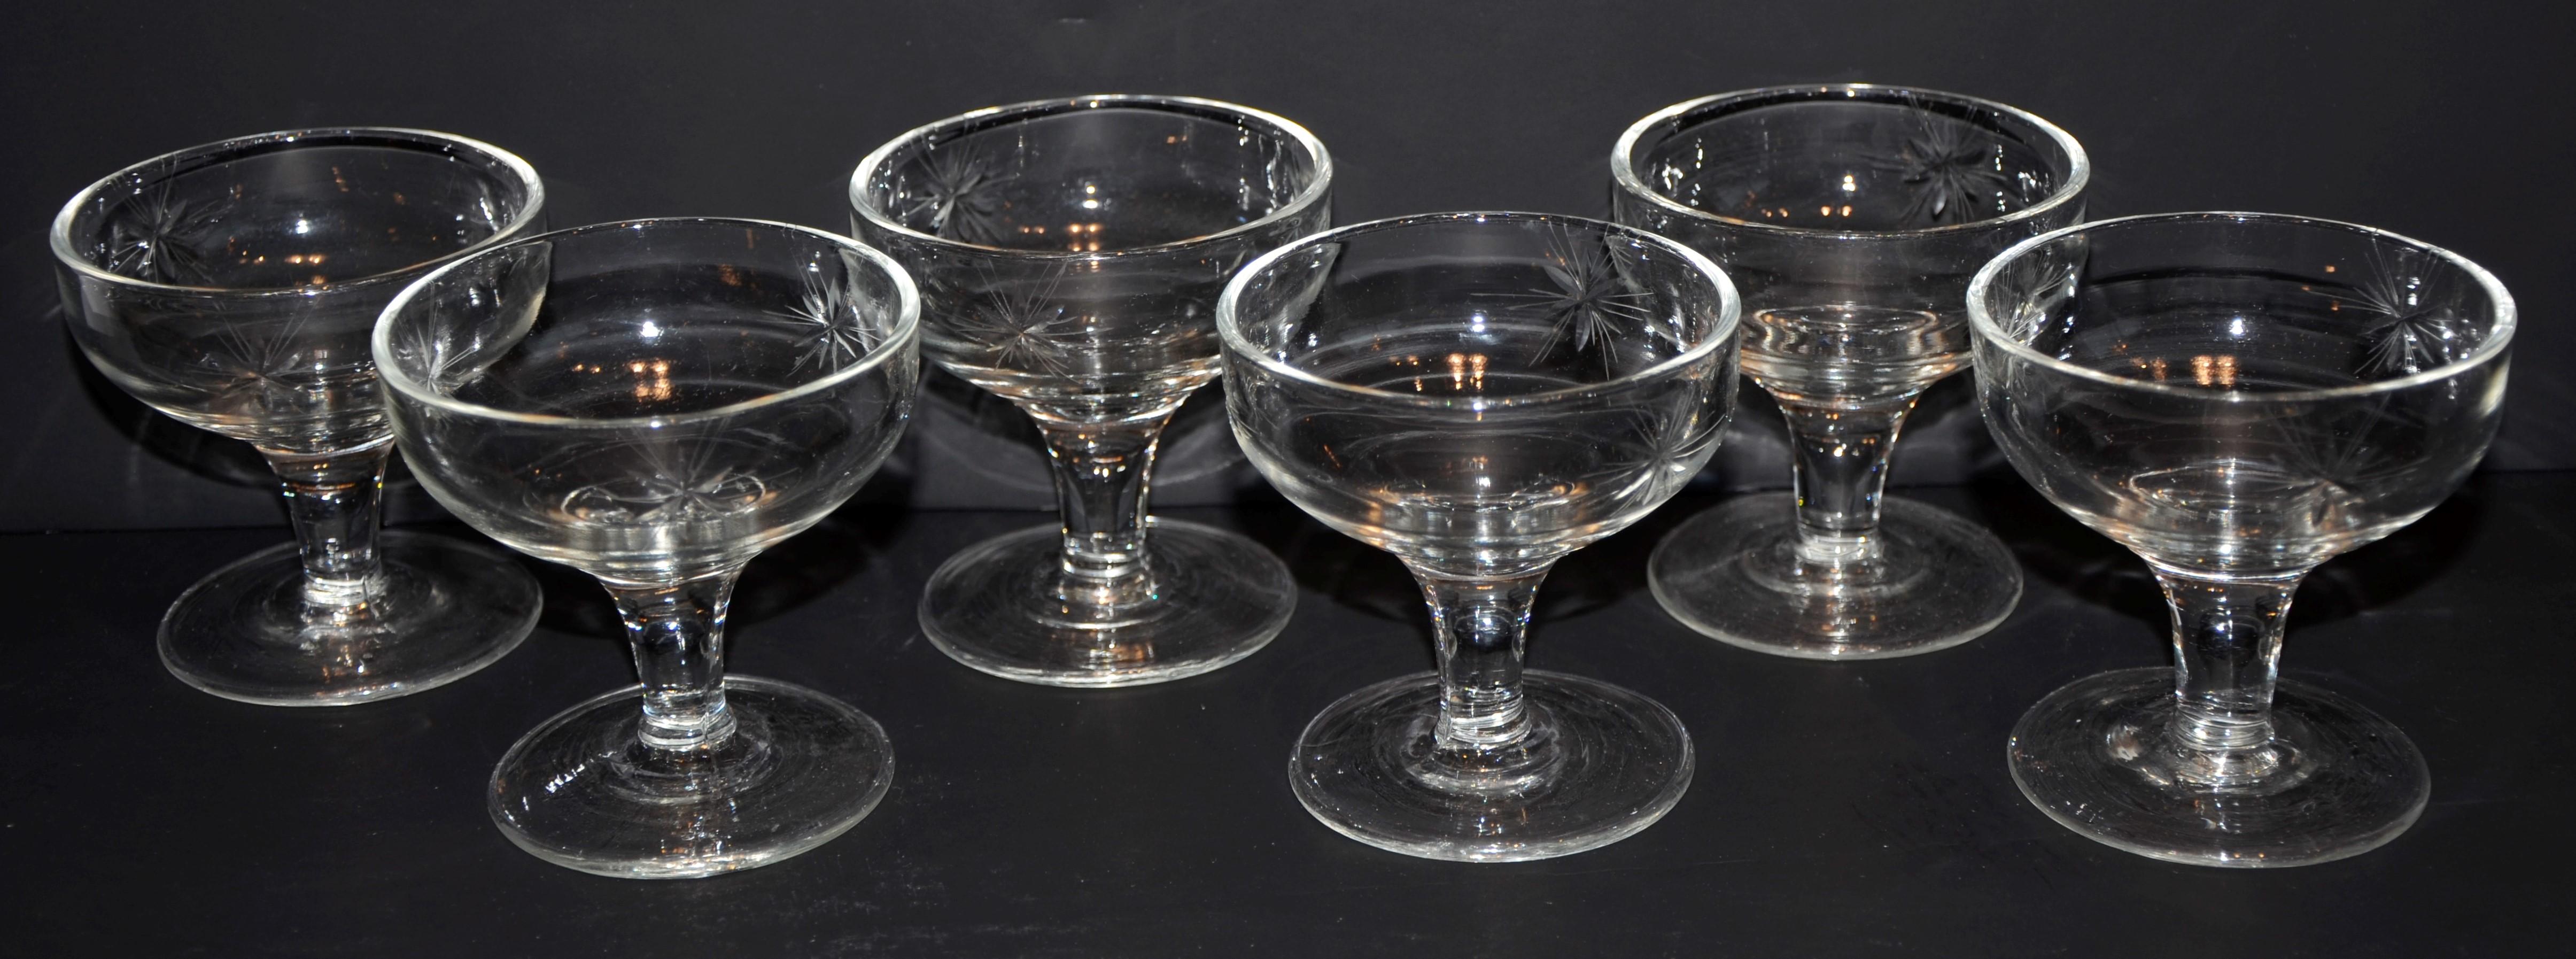 Mid-Century Modern Set of 6 Starburst Etched Glass Champagne Coupe Glasses For Sale